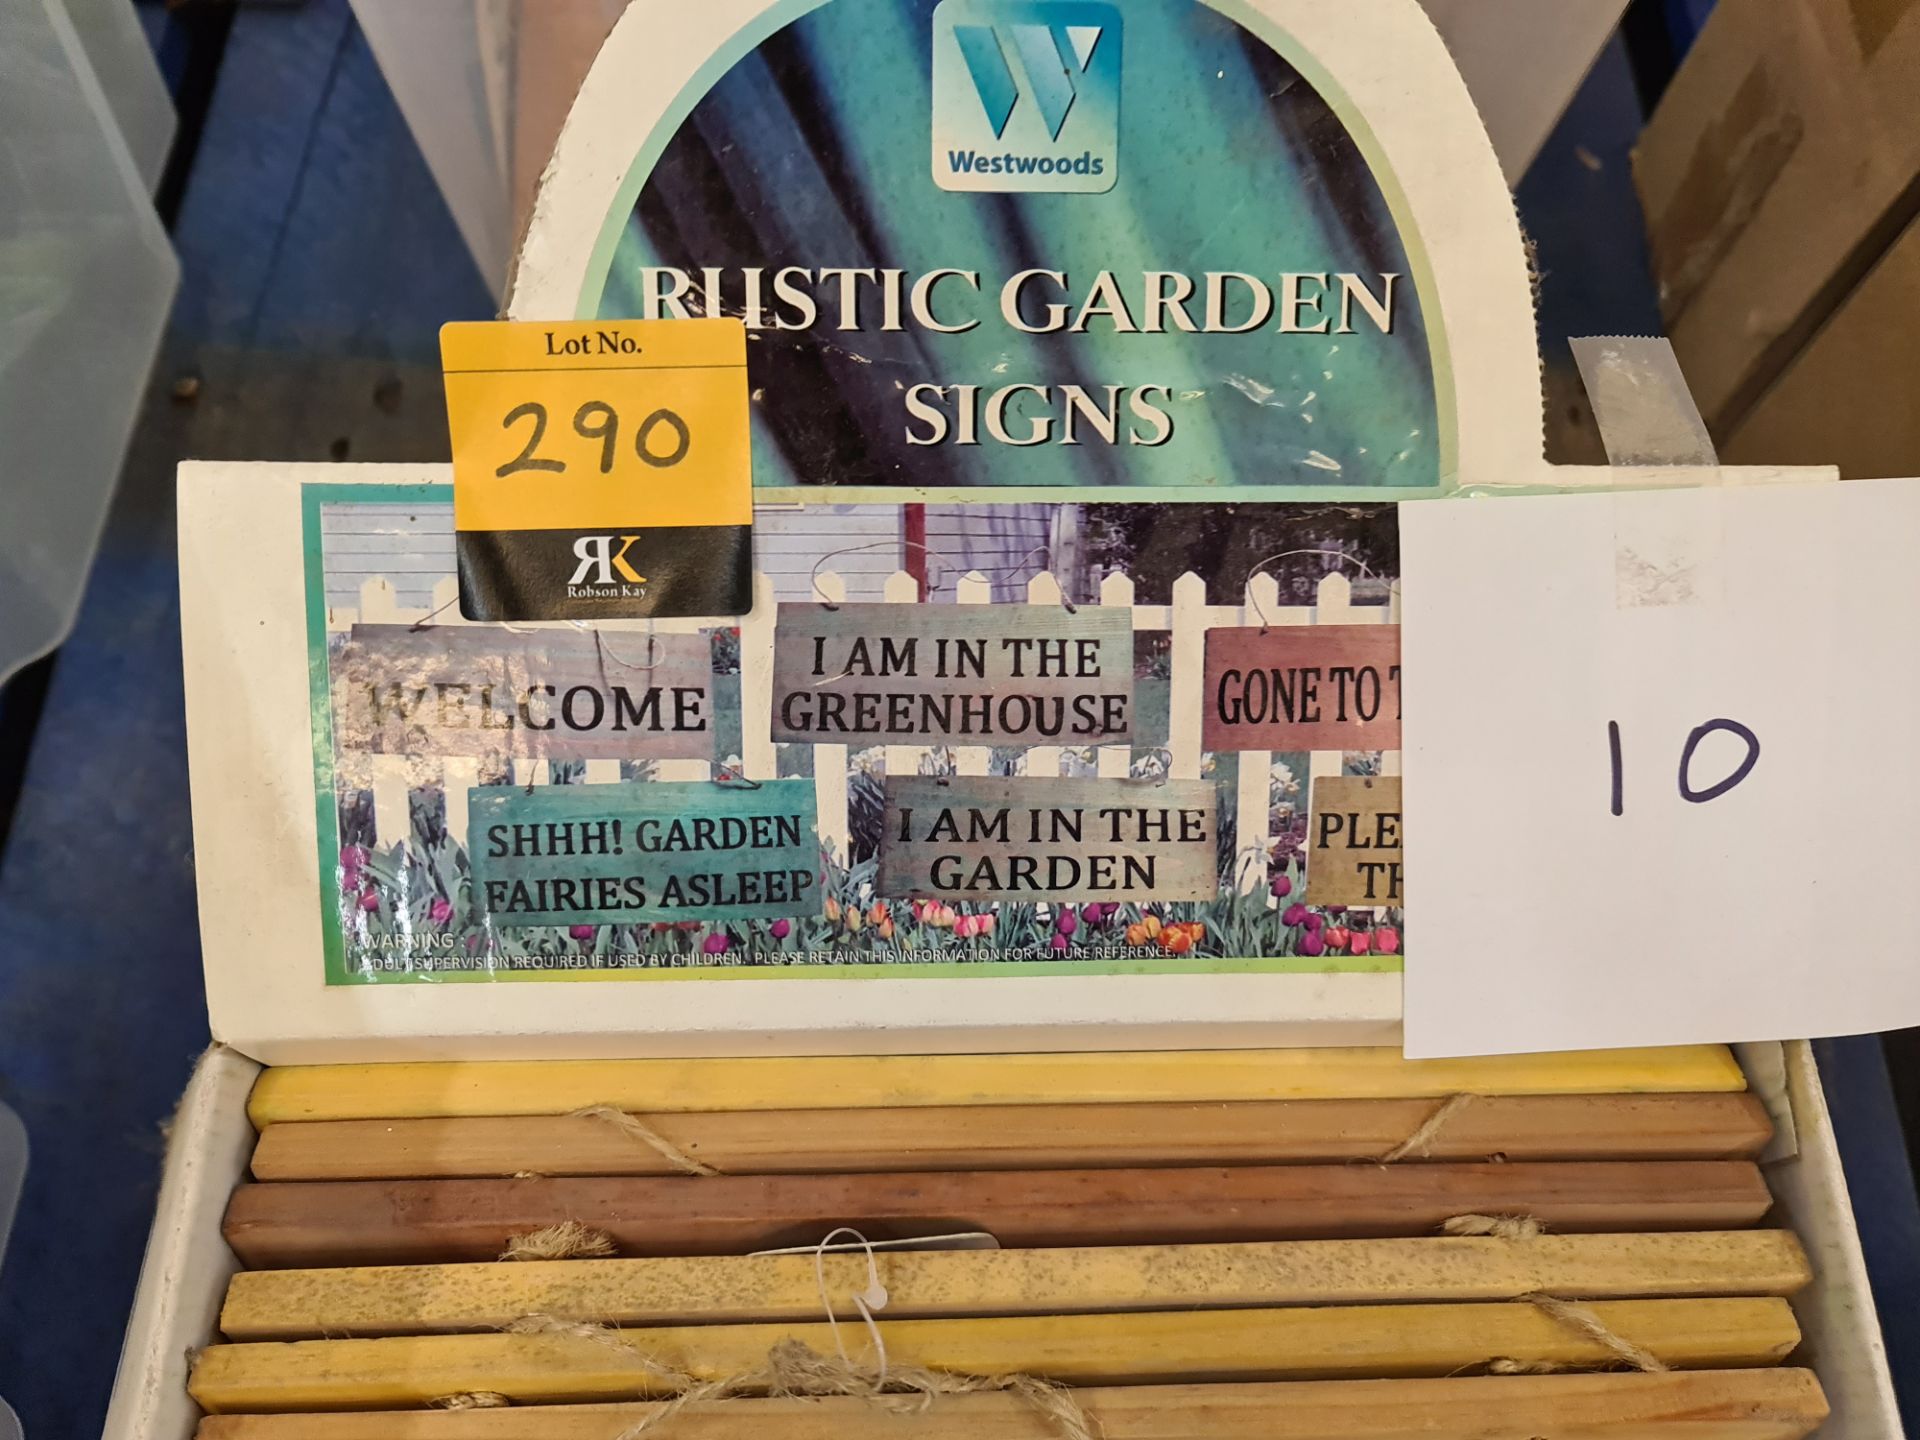 10 off assorted rustic garden signs - Image 3 of 3